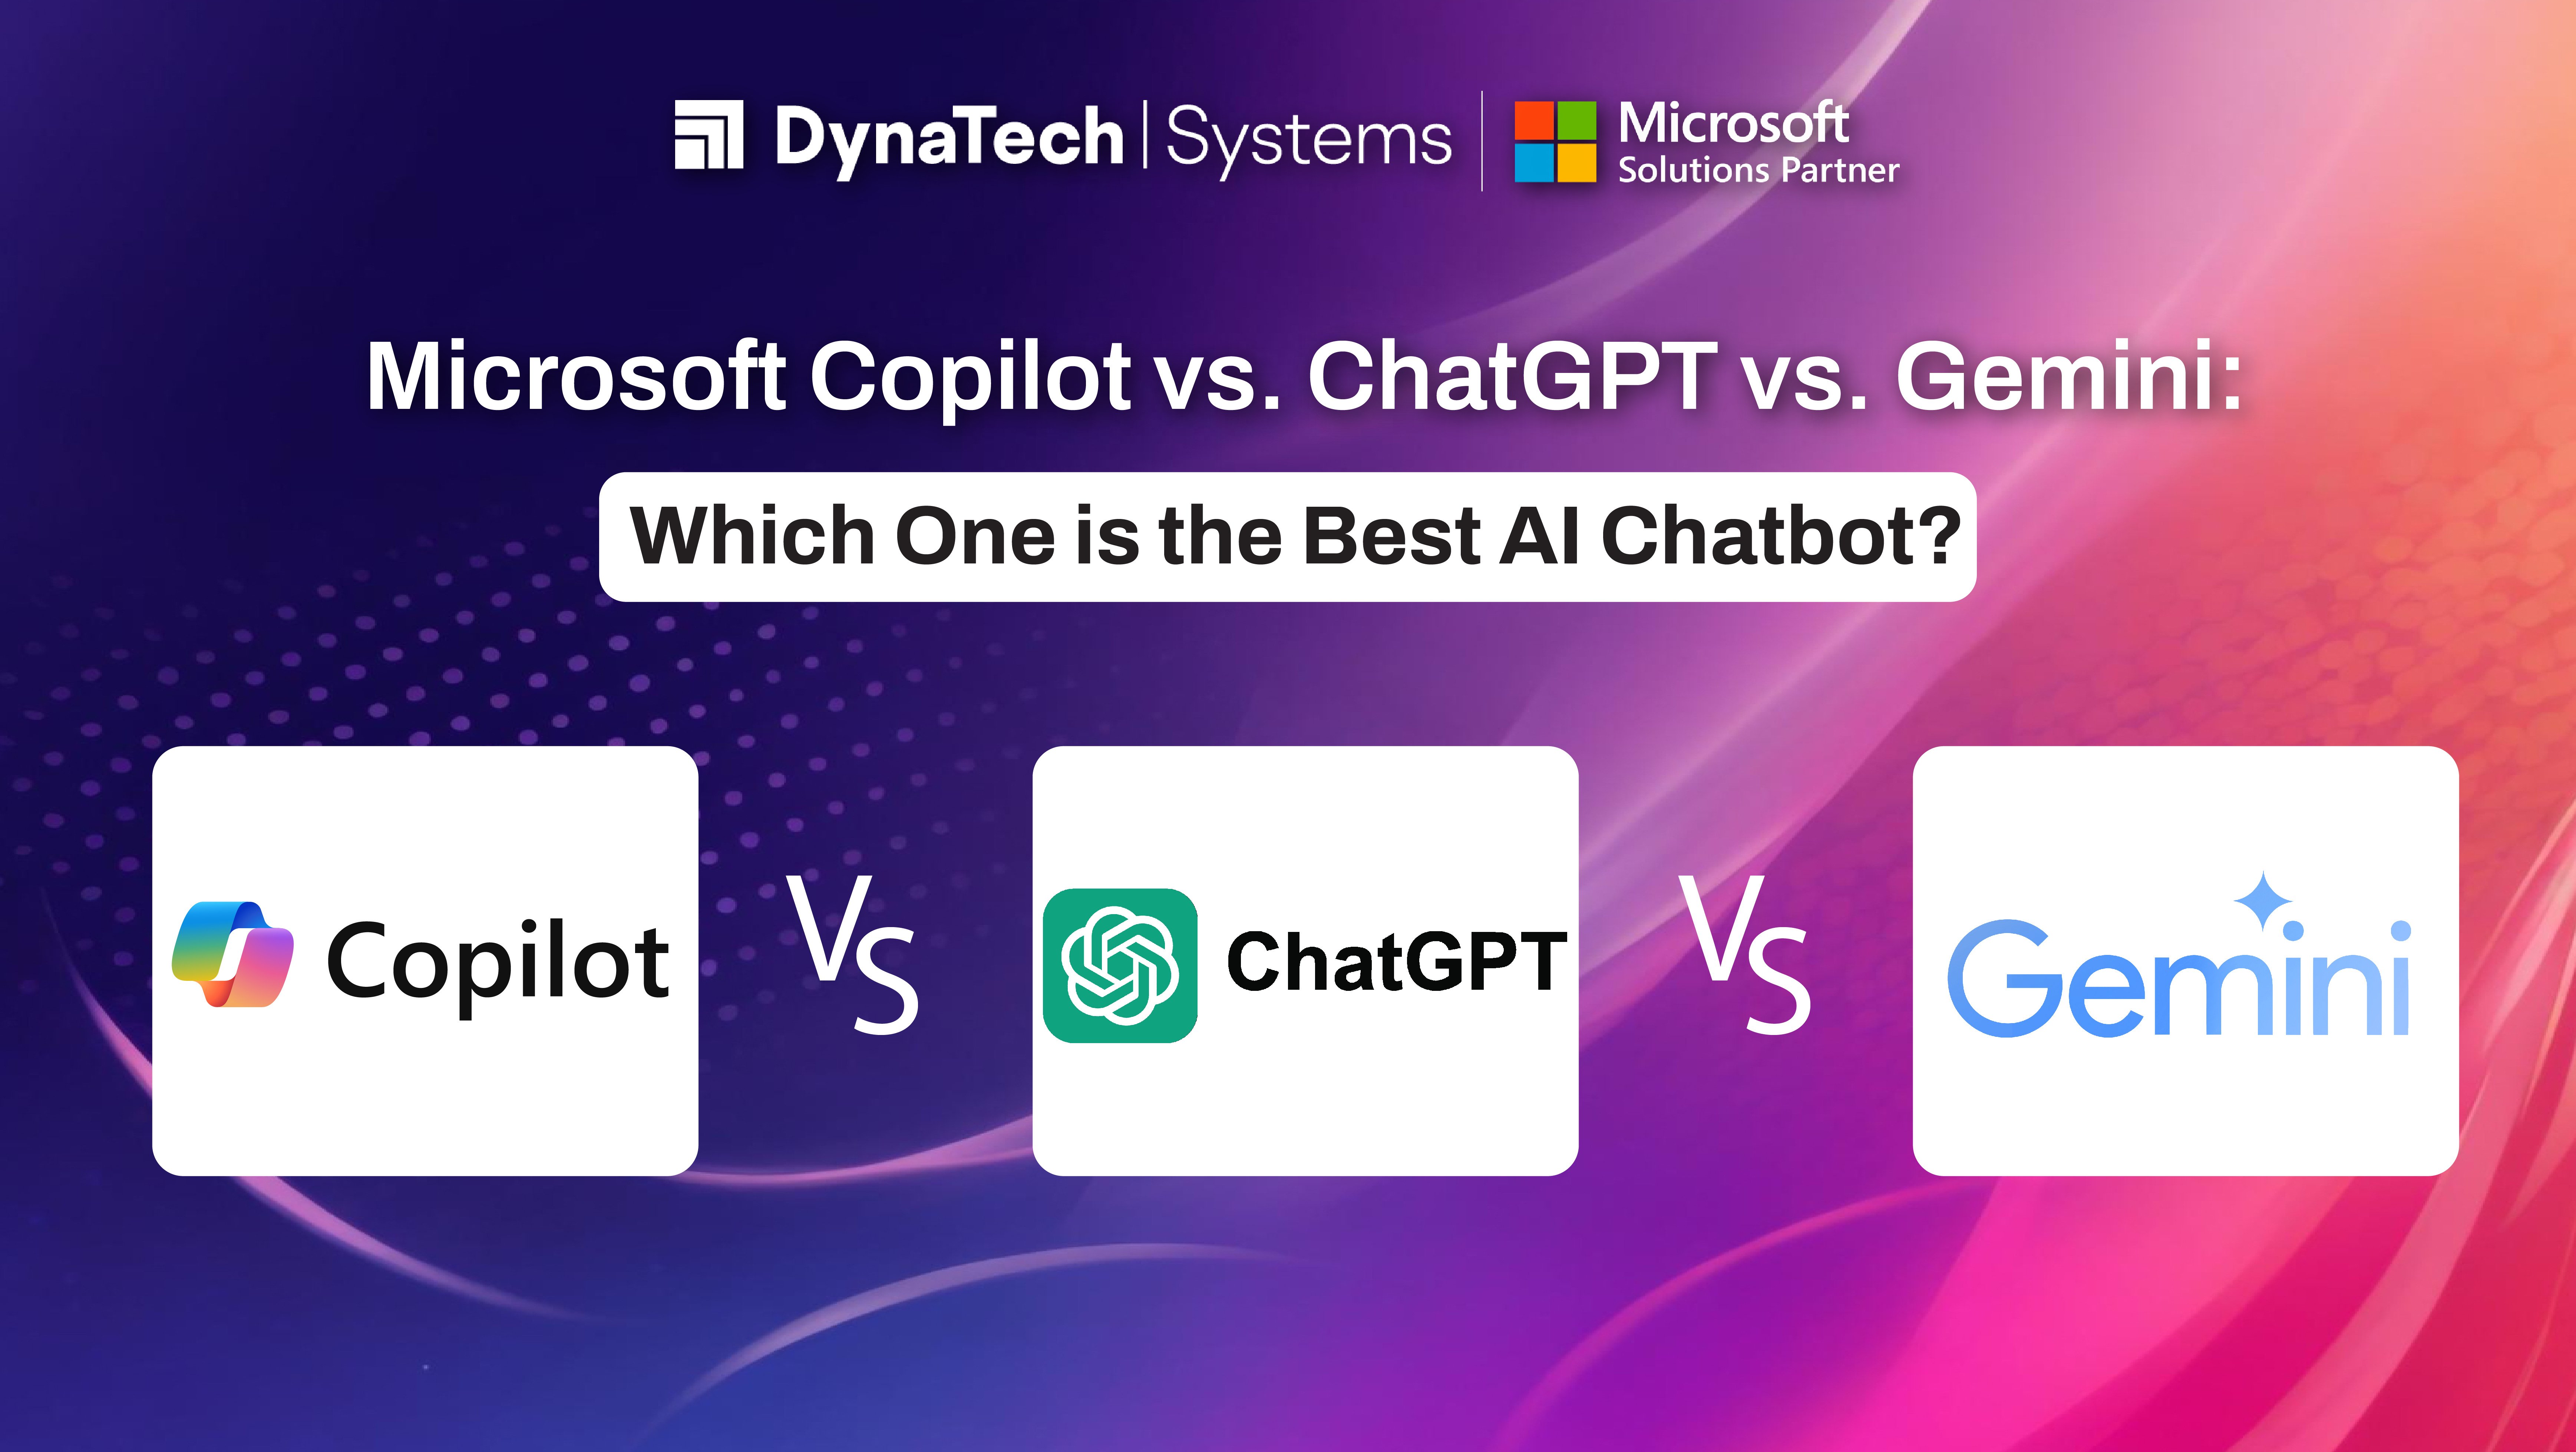 Microsoft Copilot vs. ChatGPT vs. Gemini: Which One is the Best AI Chatbot?